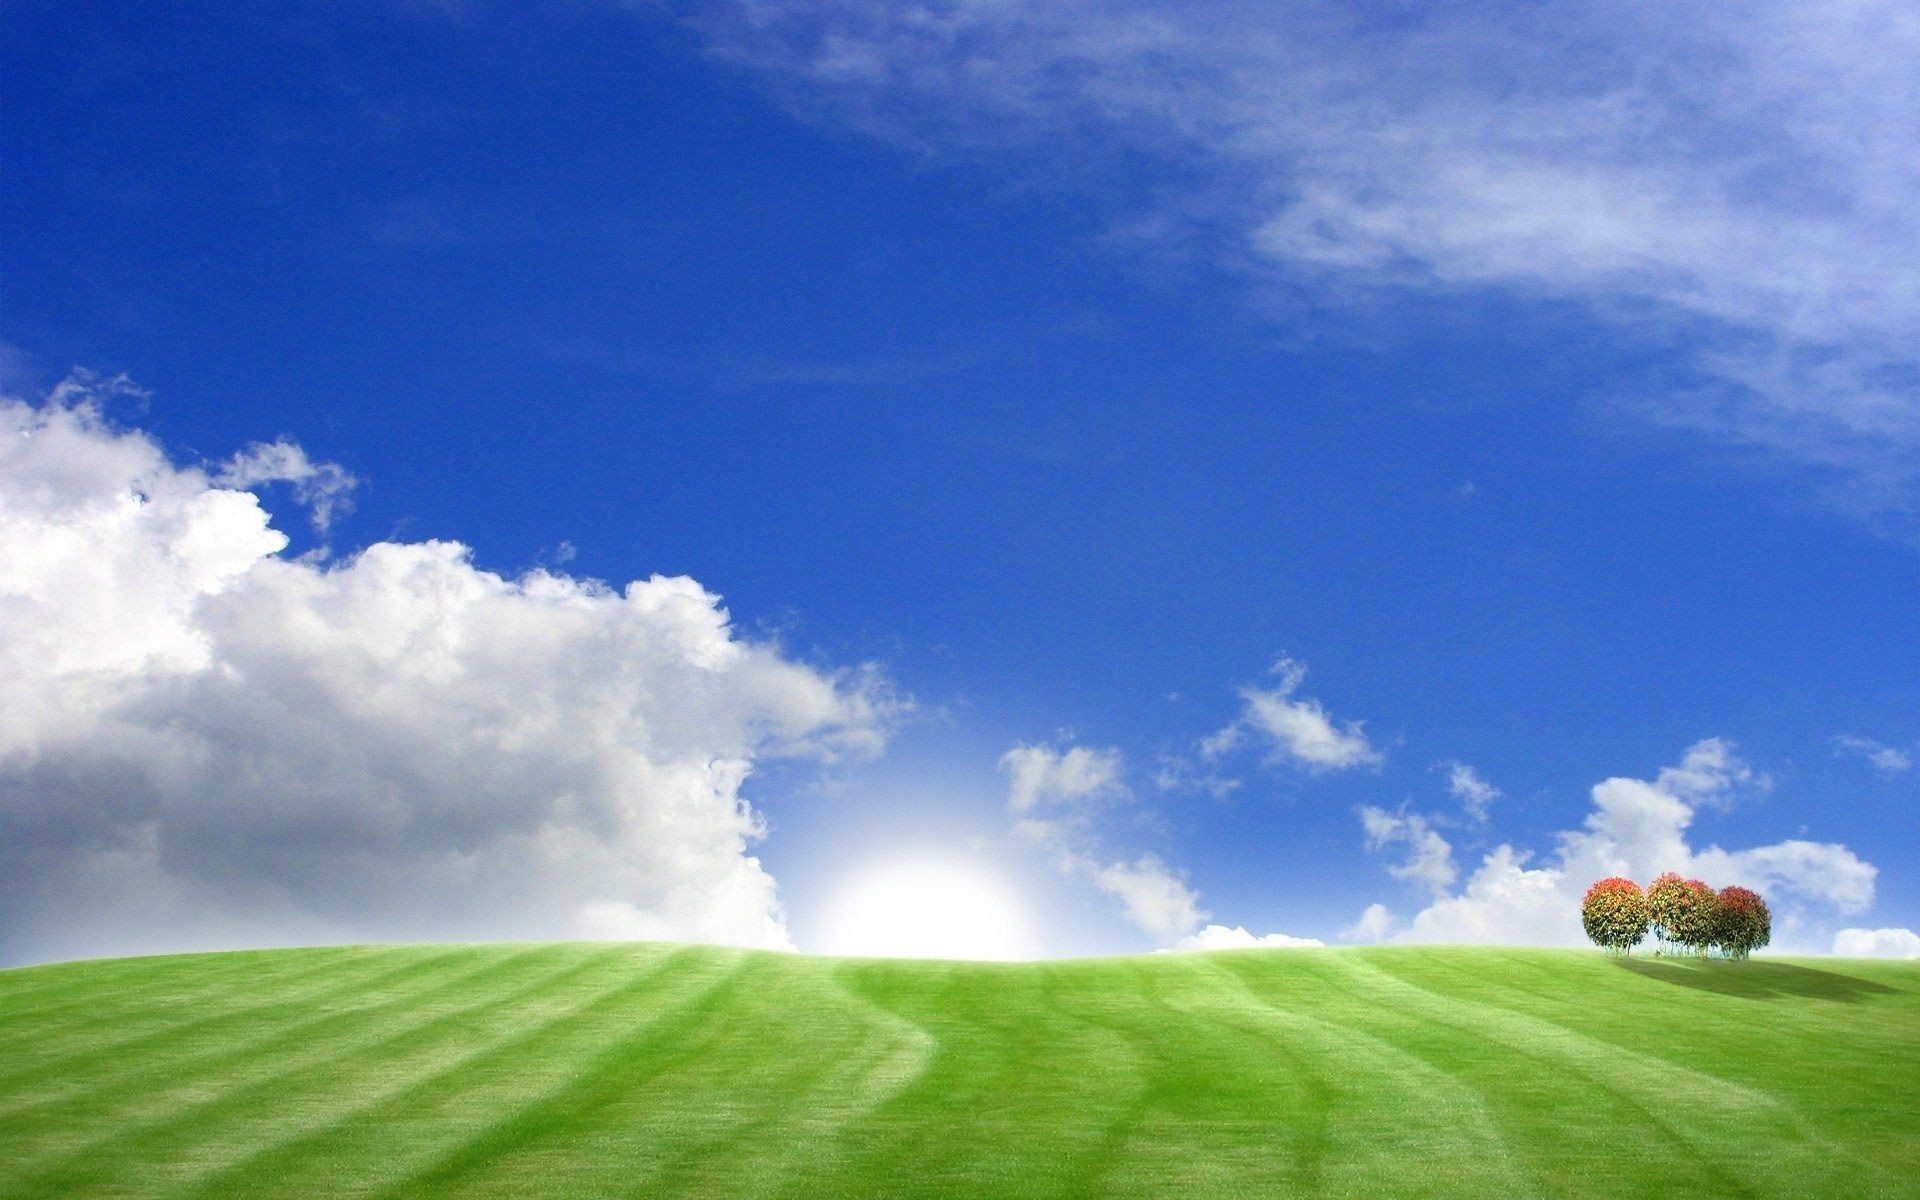 Grass And Sky Wallpaper (best Grass And Sky Wallpaper and image) on WallpaperChat